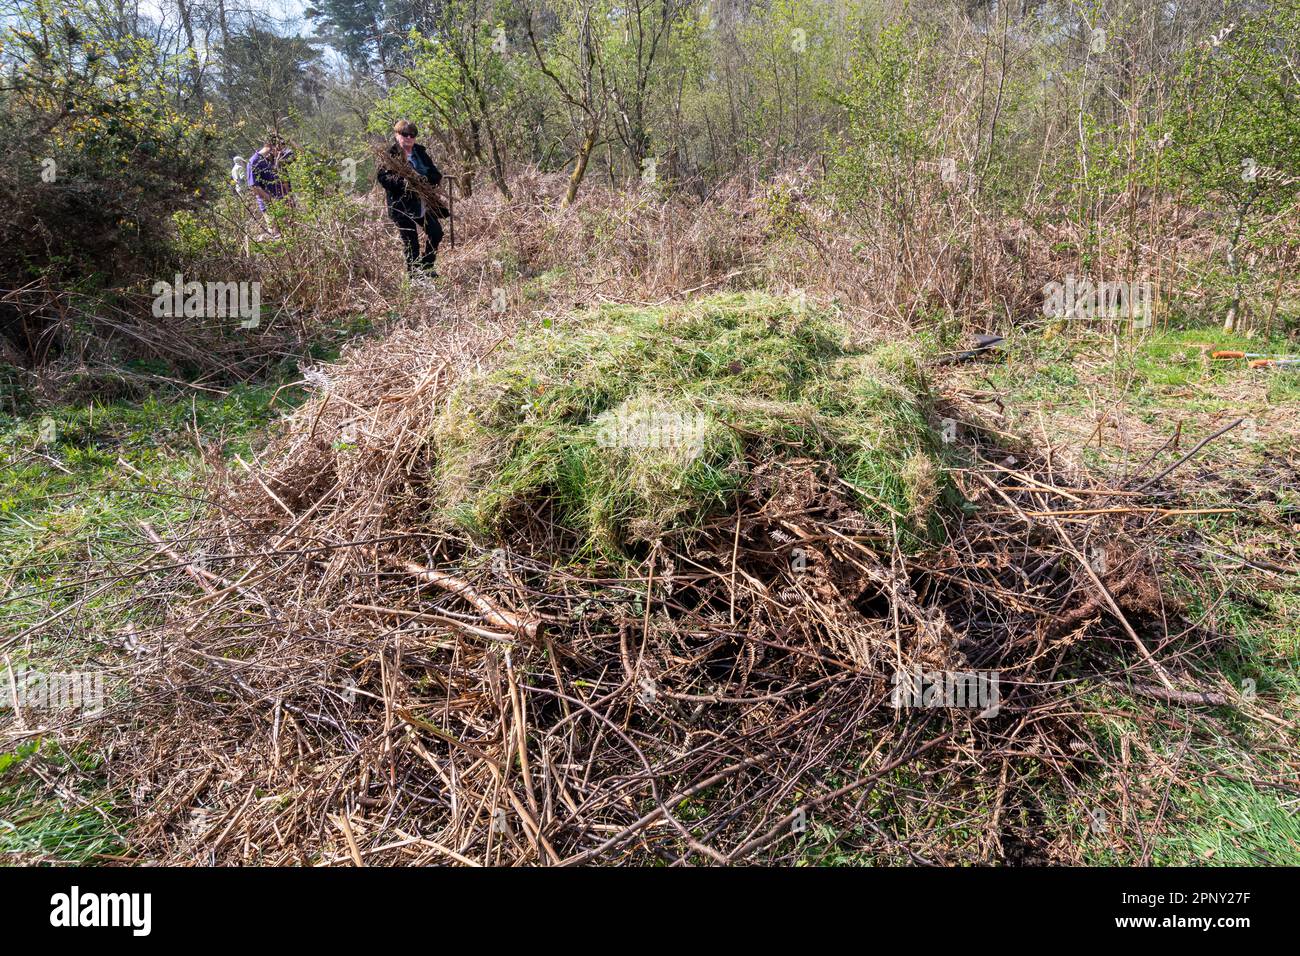 Volunteers creating grass snake piles for Natrix helvetica snakes to lay eggs, England, UK, made of cut tree branches, grass cuttings and manure Stock Photo